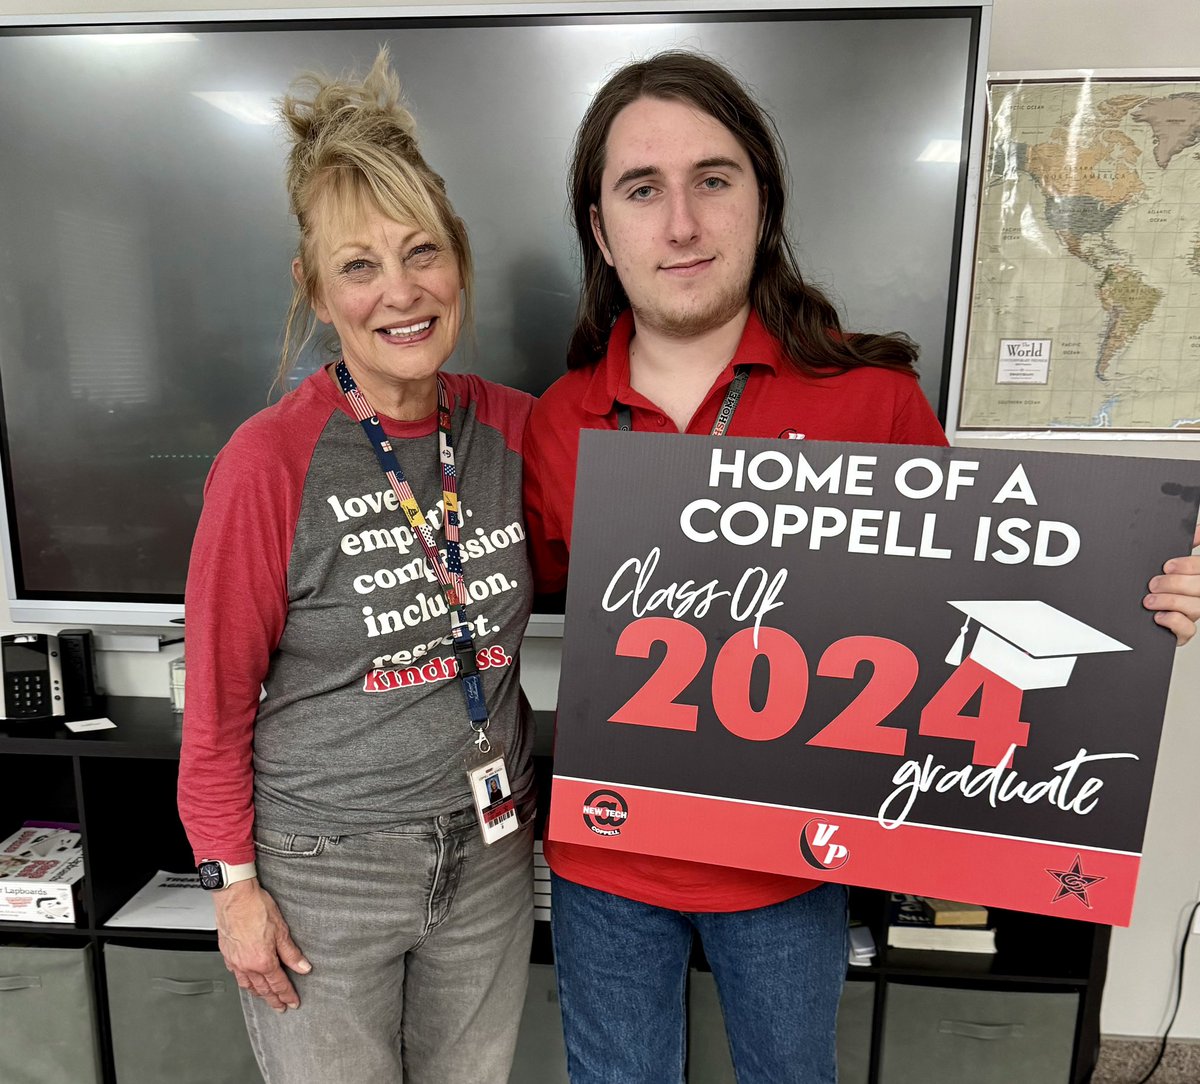 Today we have TWO graduates! Congratulations, Bryce and Xander! @coppellisd